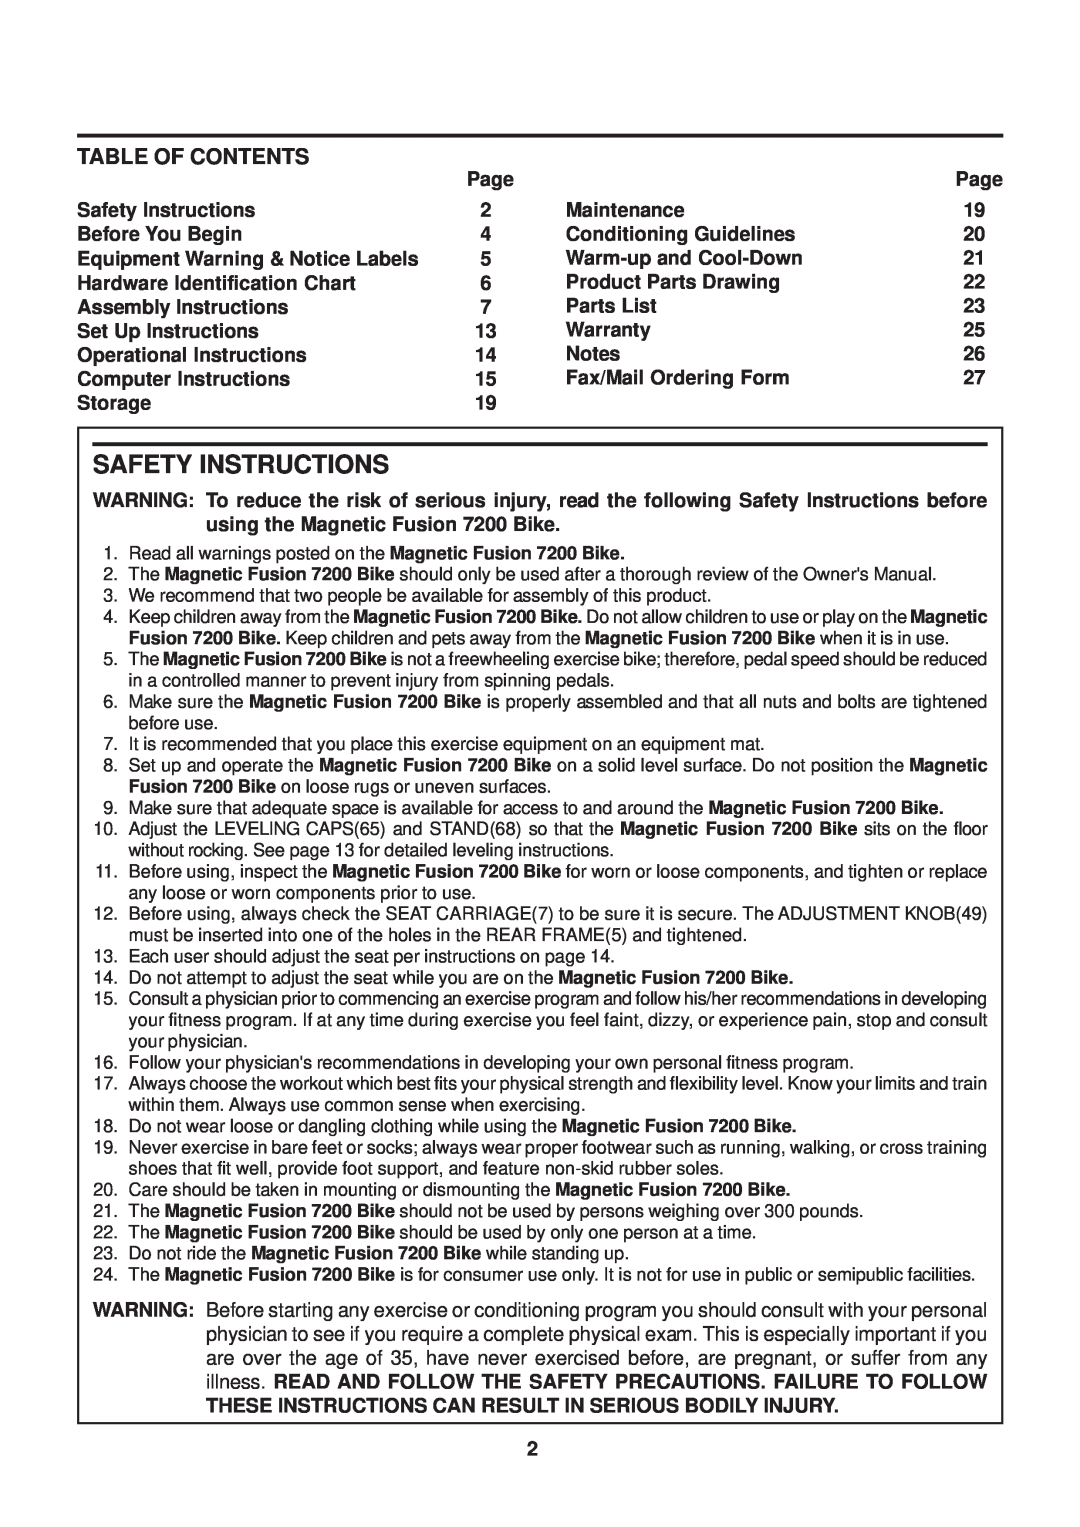 Stamina Products 15-7200 owner manual Safety Instructions, Table Of Contents 